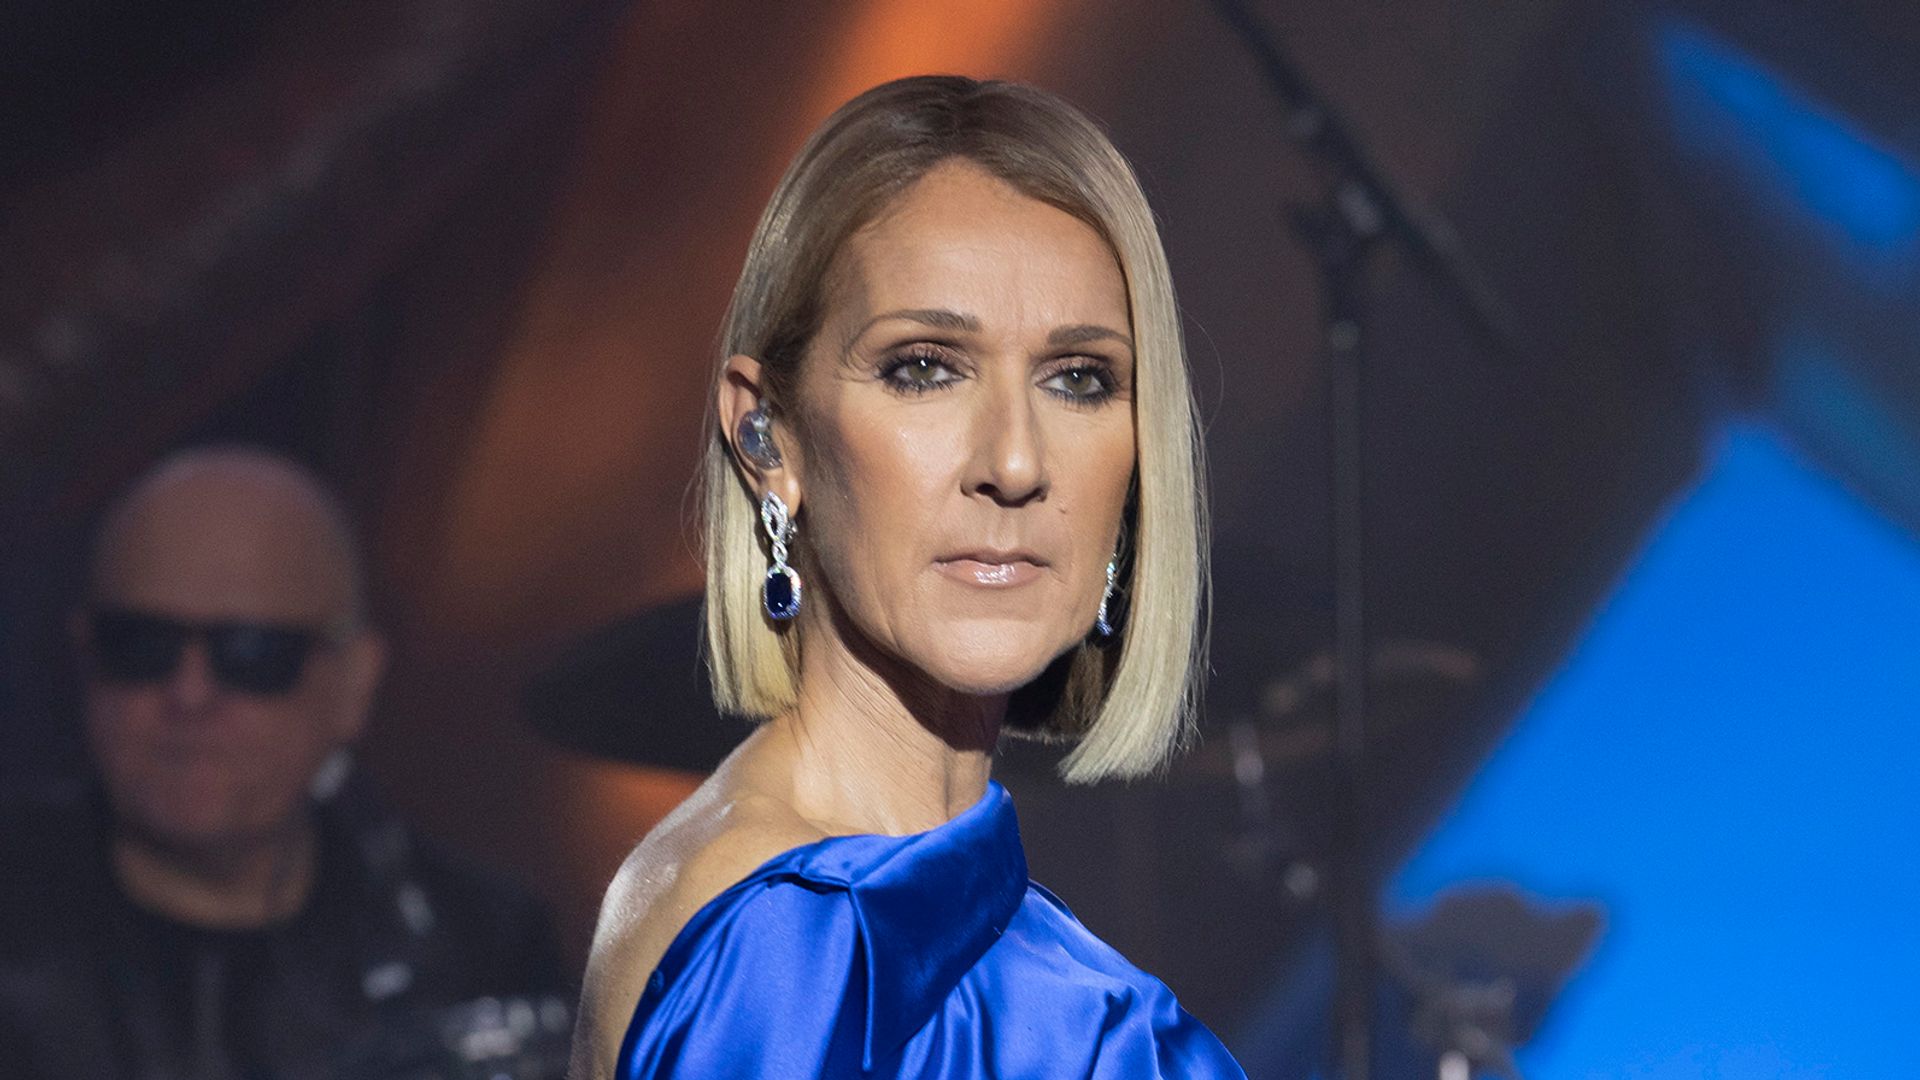 Celine Dion looking serious in a blue dress